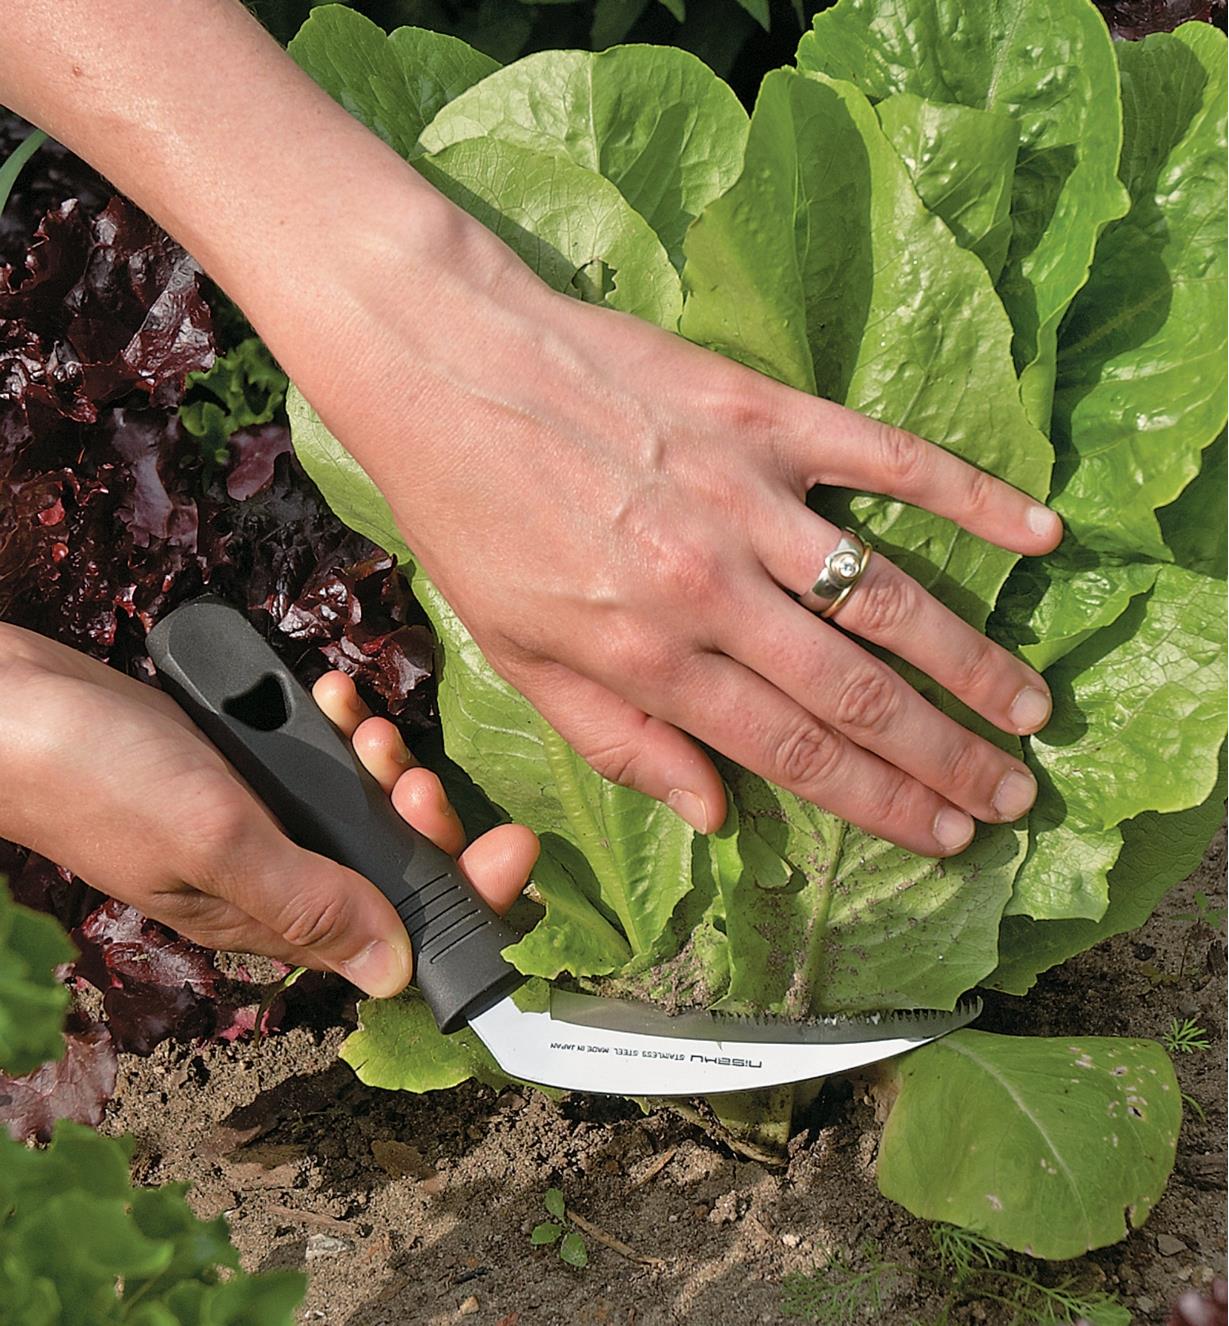 Using the sickle knife to cut plants close to the ground